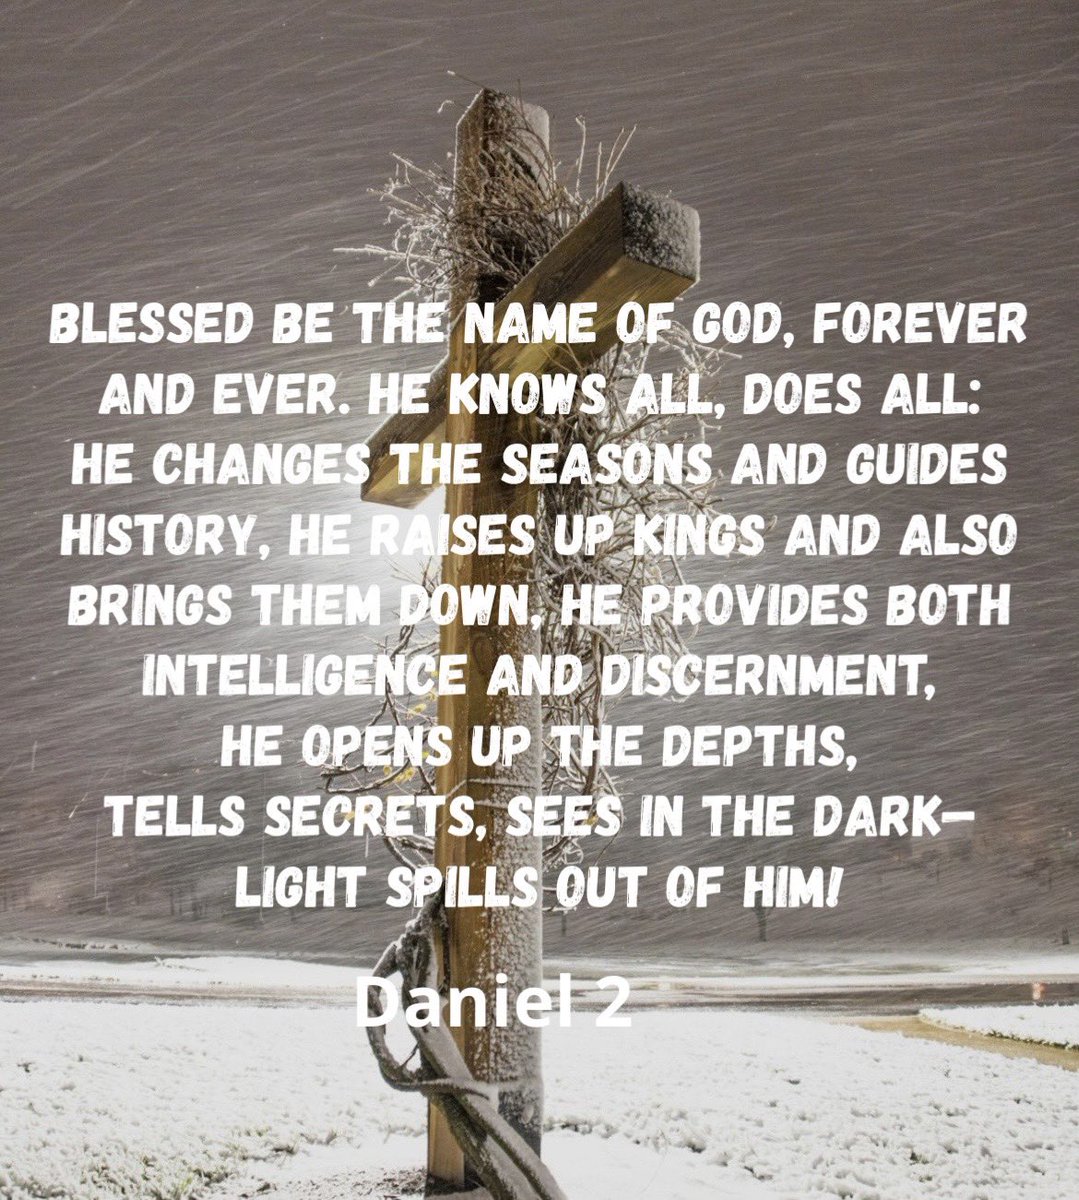 Blessed is his name, forever and ever. #WorthyIsTheLamb #GodIsGreat #GodWins